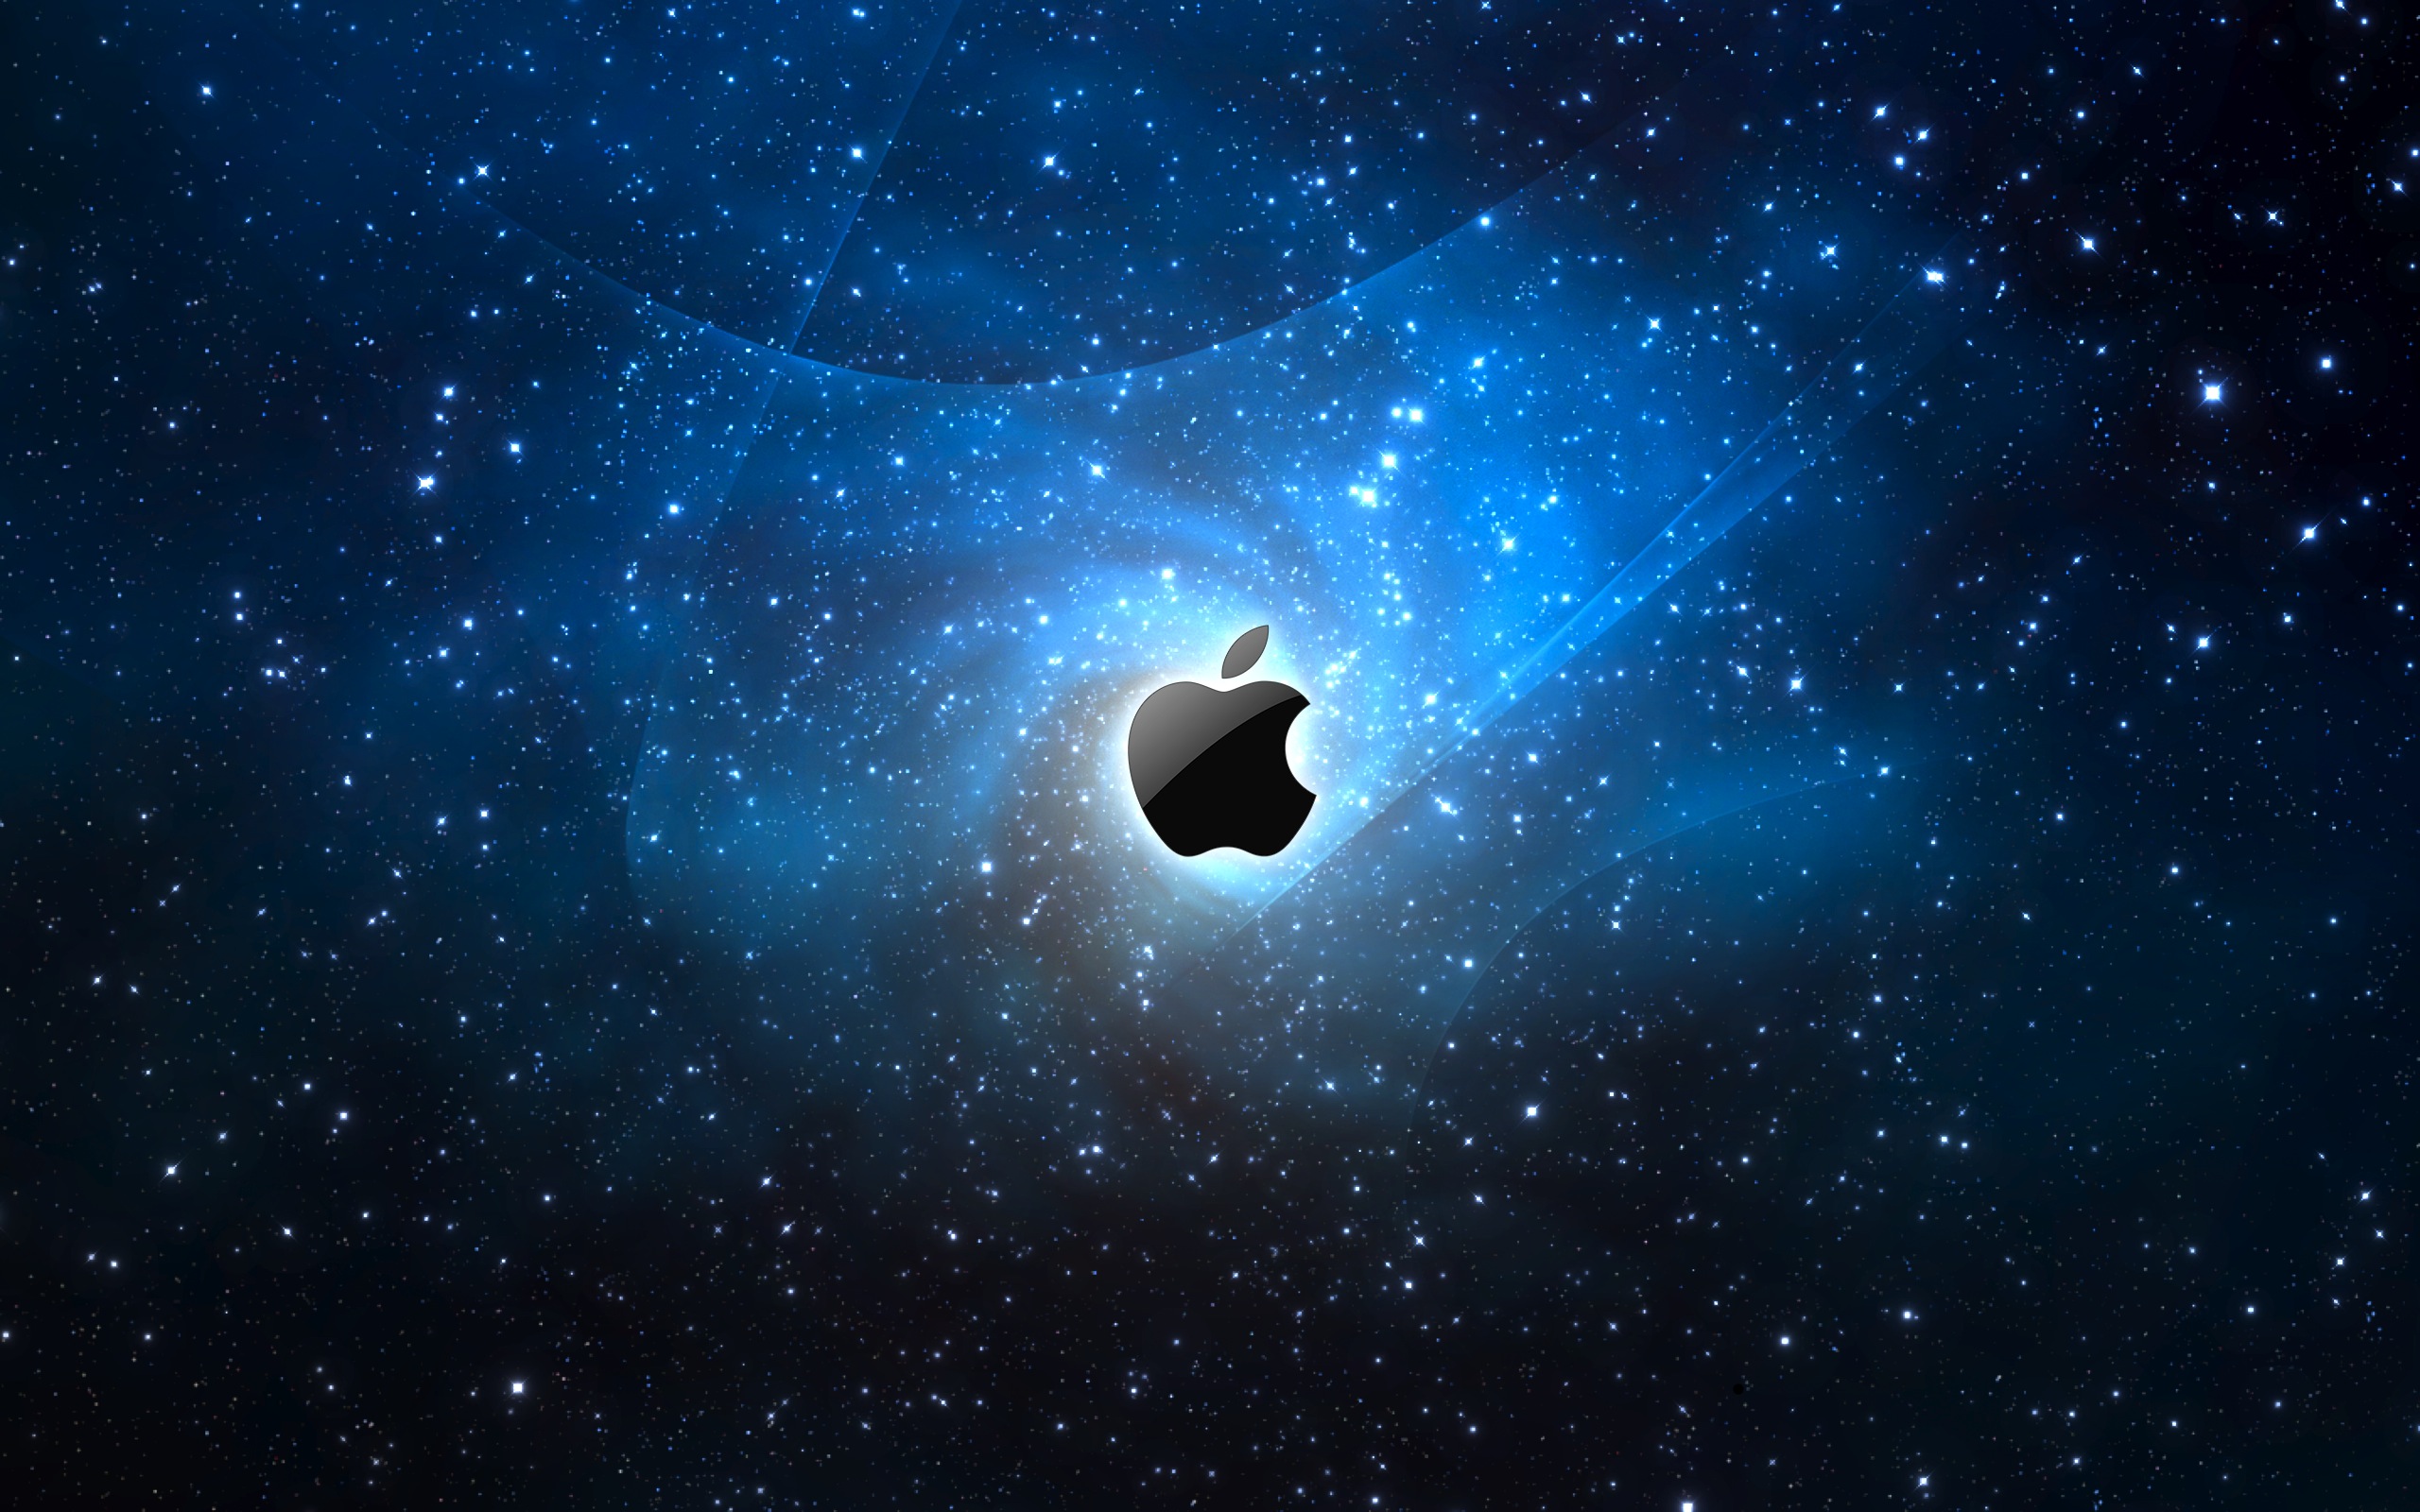 Apple Icon On Star Galaxy Background Wallpapers And Images